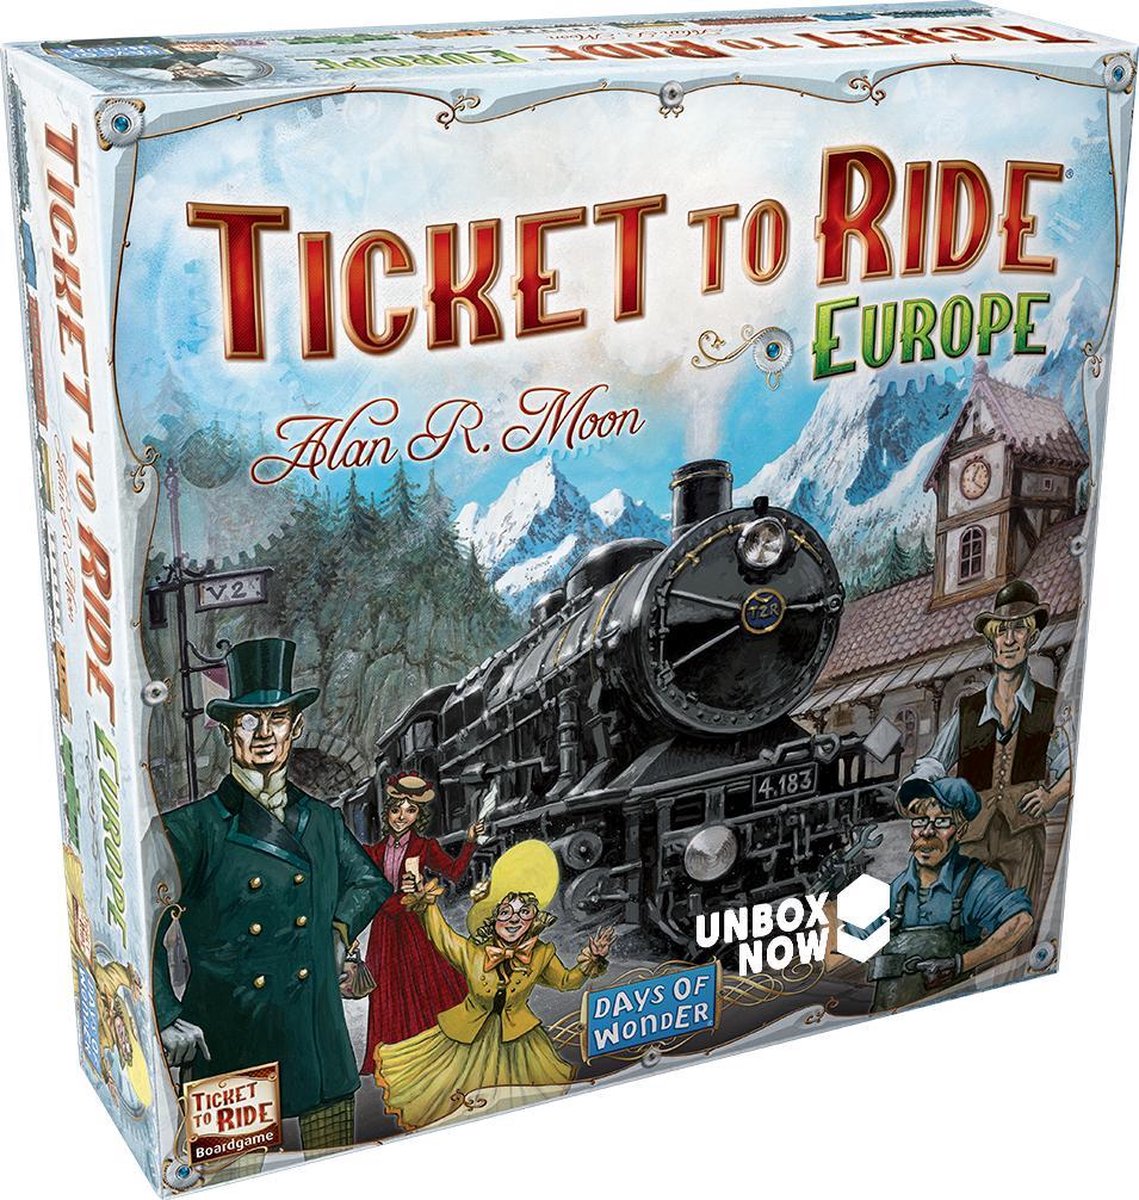 TICKET TO RIDE - 1 10 20 30 40 50 60 70 80 90 100 110 120 130 140 150 160 170 180 190 200 210 220 230 240 250 260 270 280 290 300 310 320 330 340 350 360 370 380 390 400 410 420 430 440 450 456 - 039236